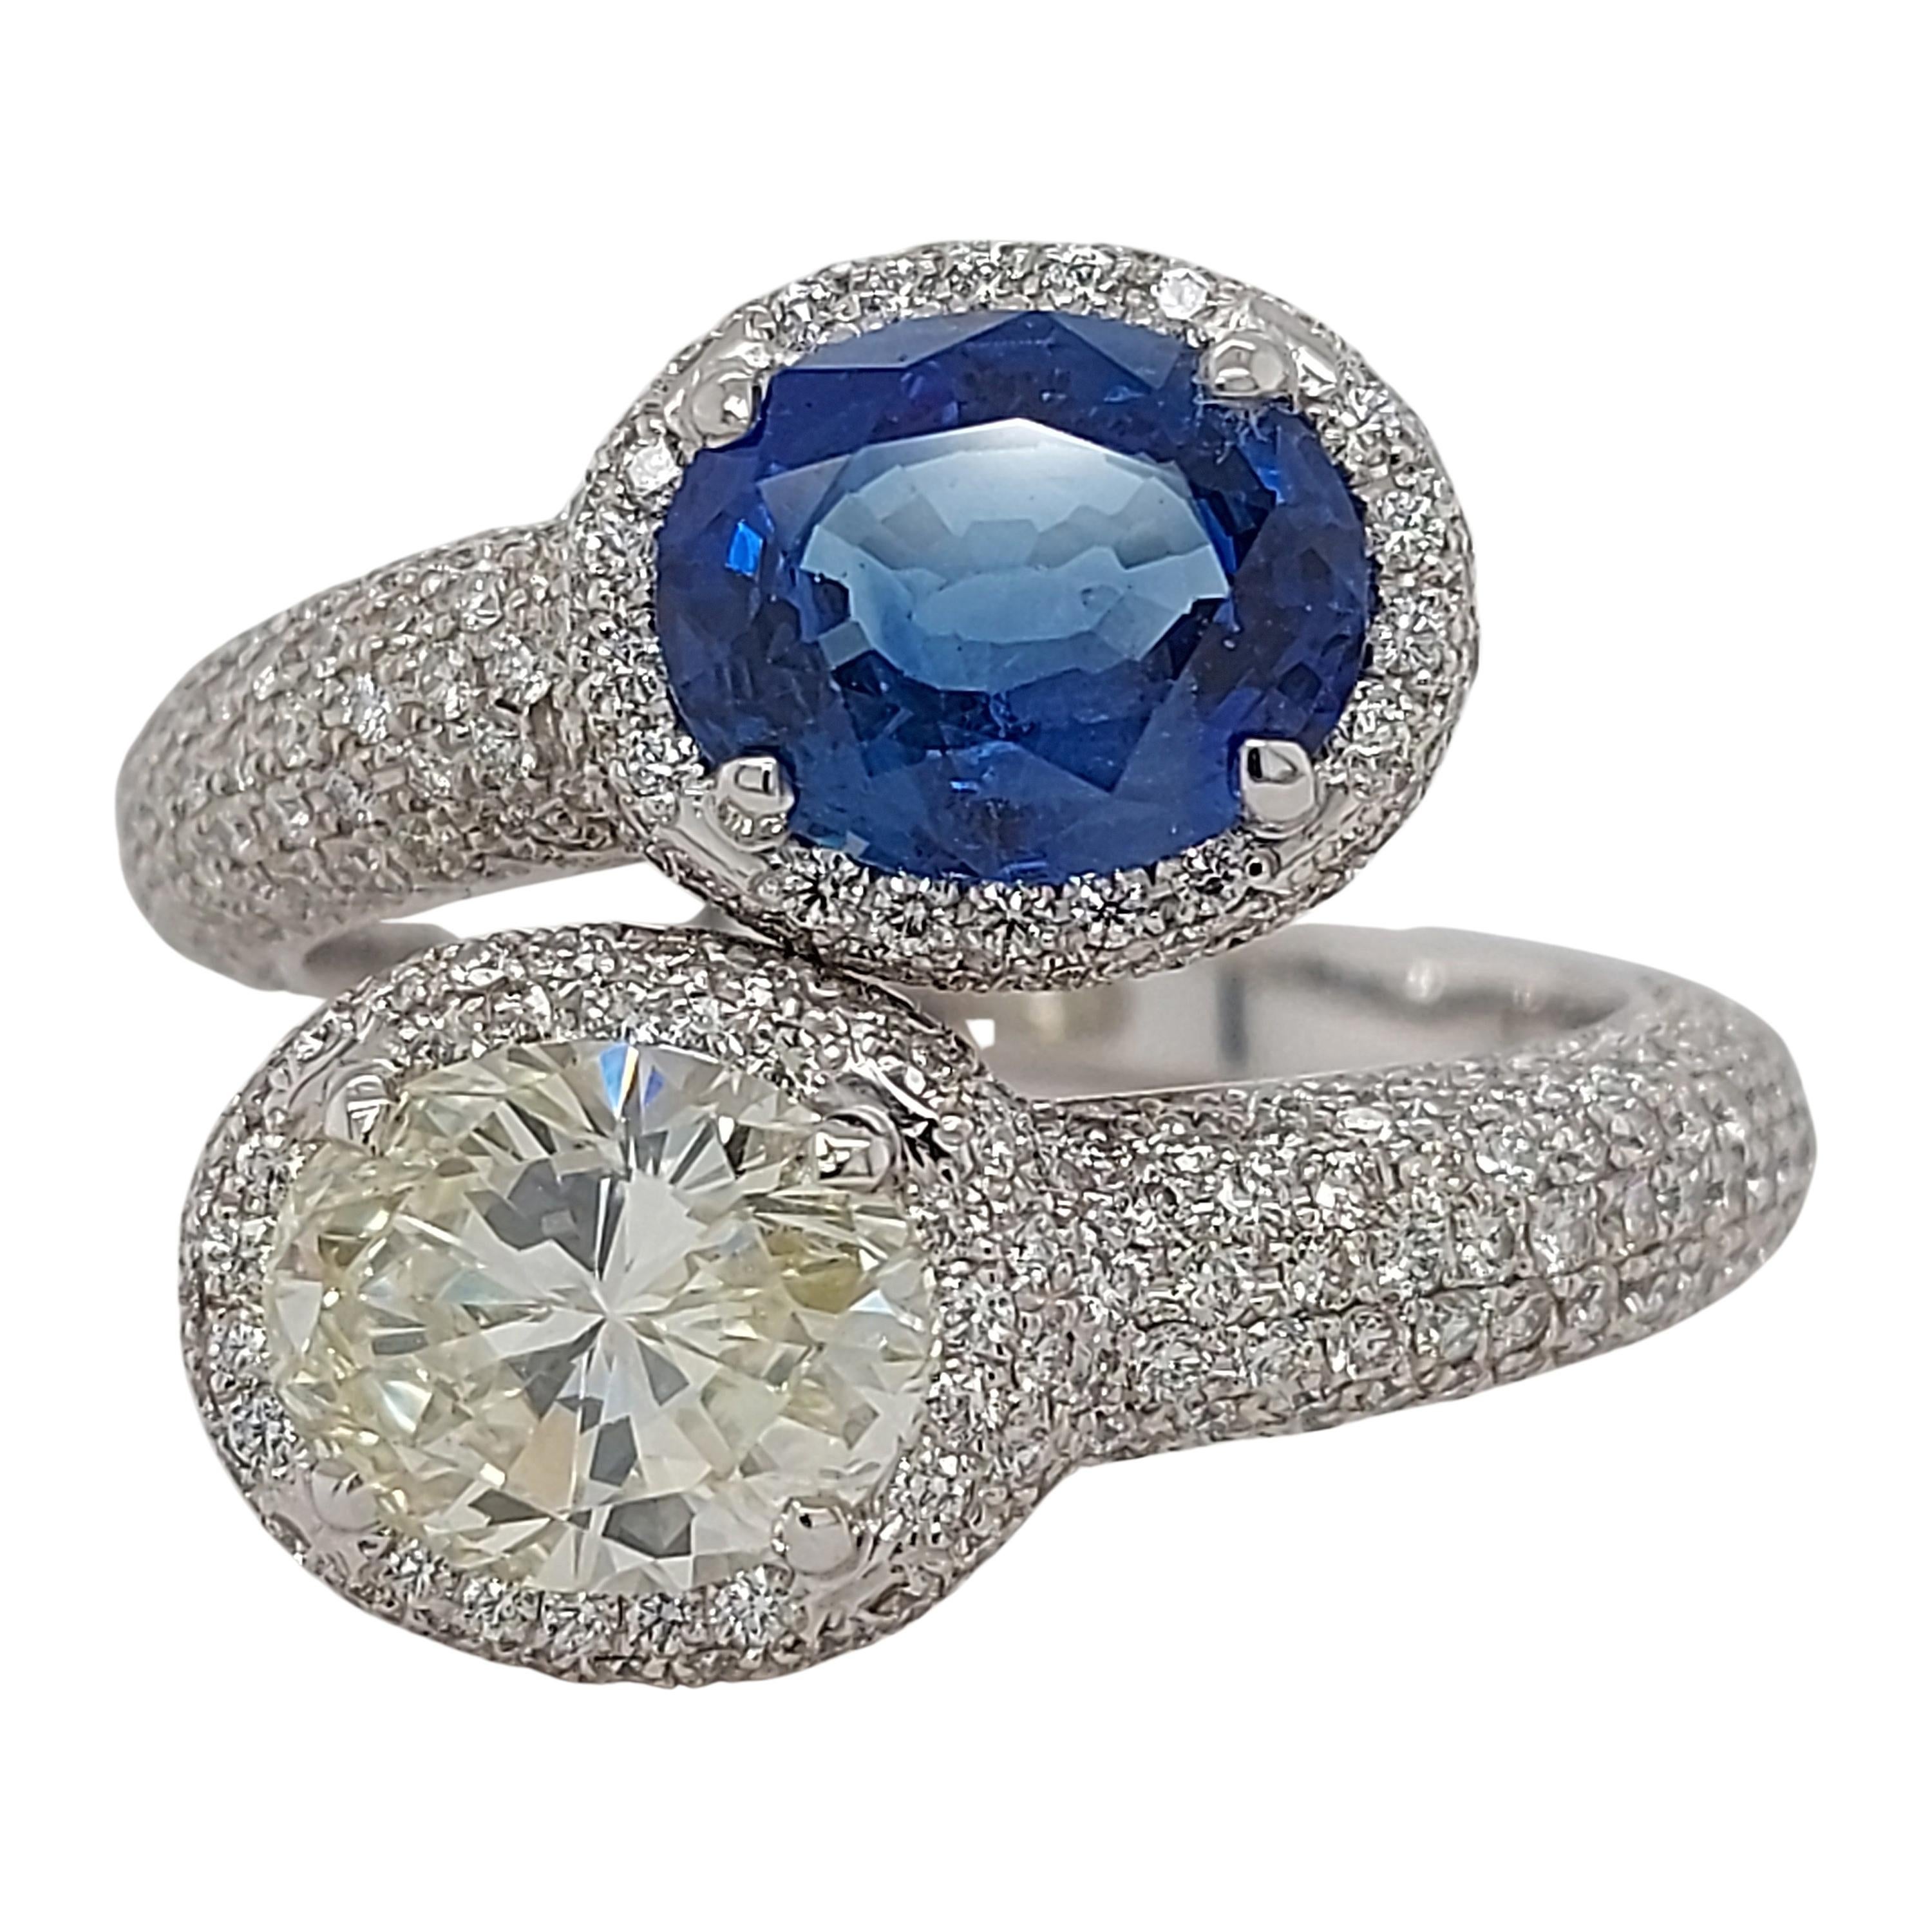 Stunning Toi et Moi 18kt White Gold Ring with a 2.63 Carat Sapphire, 1.67 Carat  For Sale